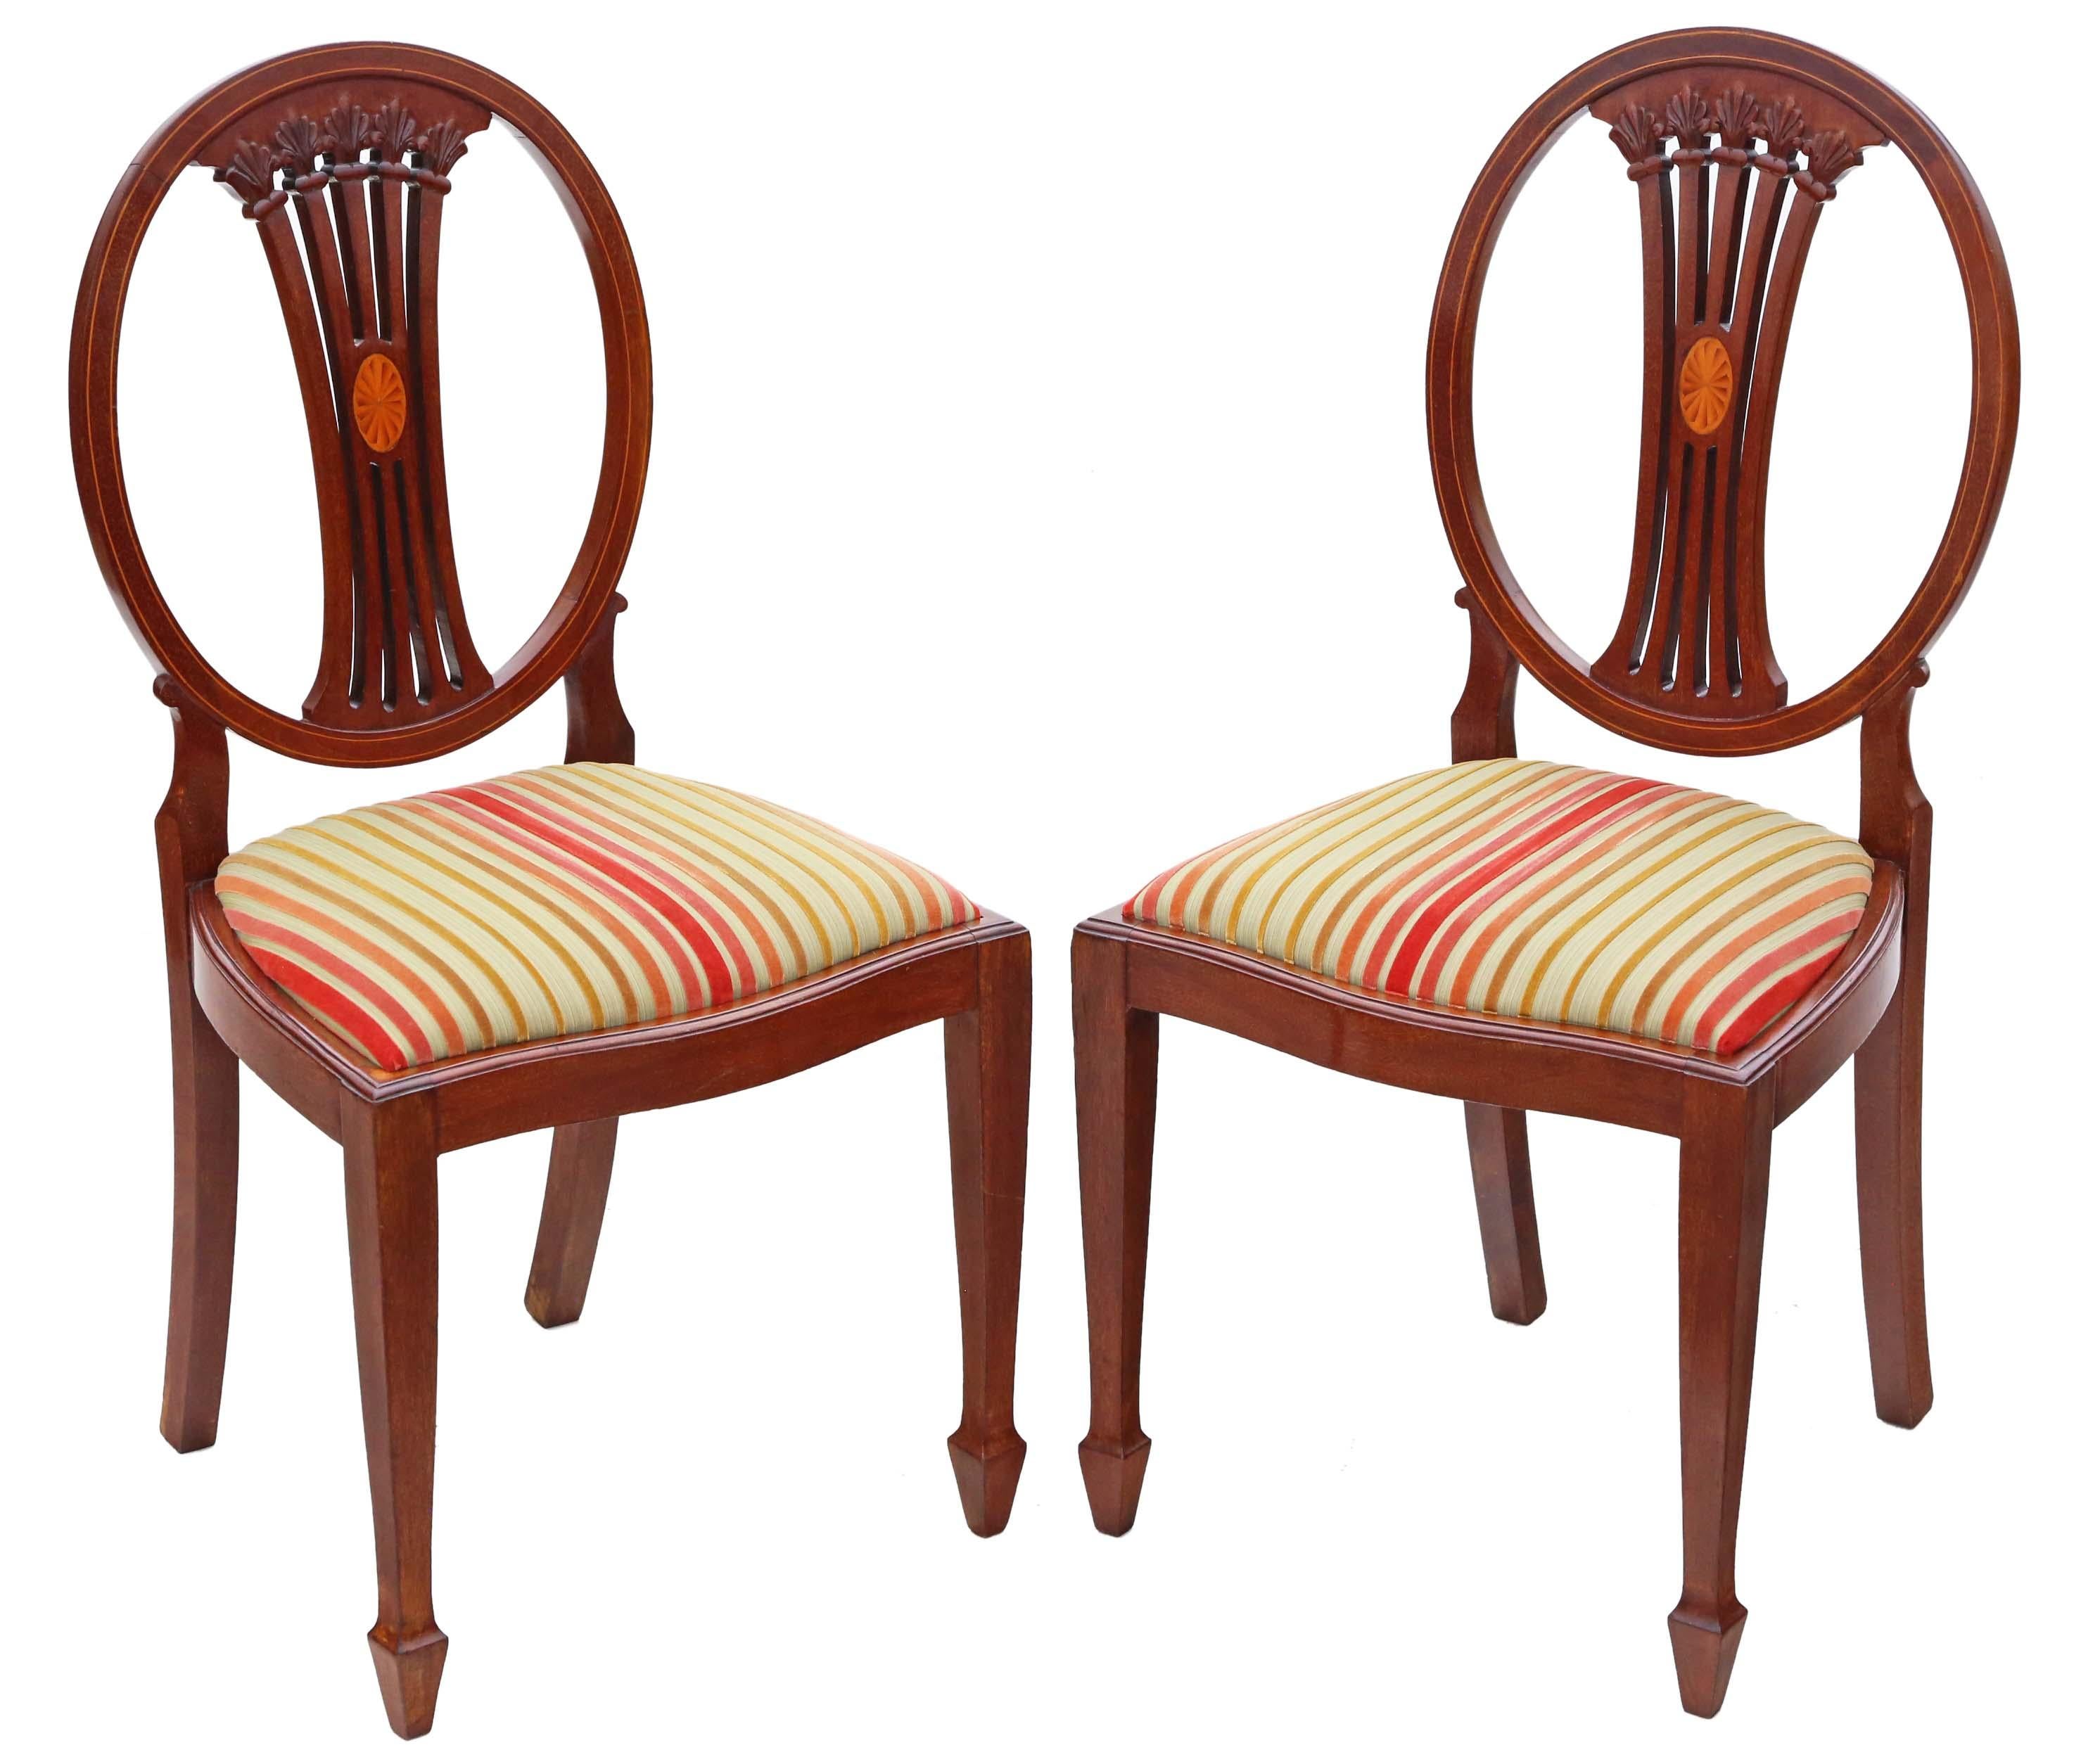 Antique quality pair of Georgian revival inlaid mahogany dining side hall bedroom chairs C1910.

Attractively carved with line and marquetry inlays. Recently restored to a very good standard.

Solid, with no loose joints and no woodworm.

As